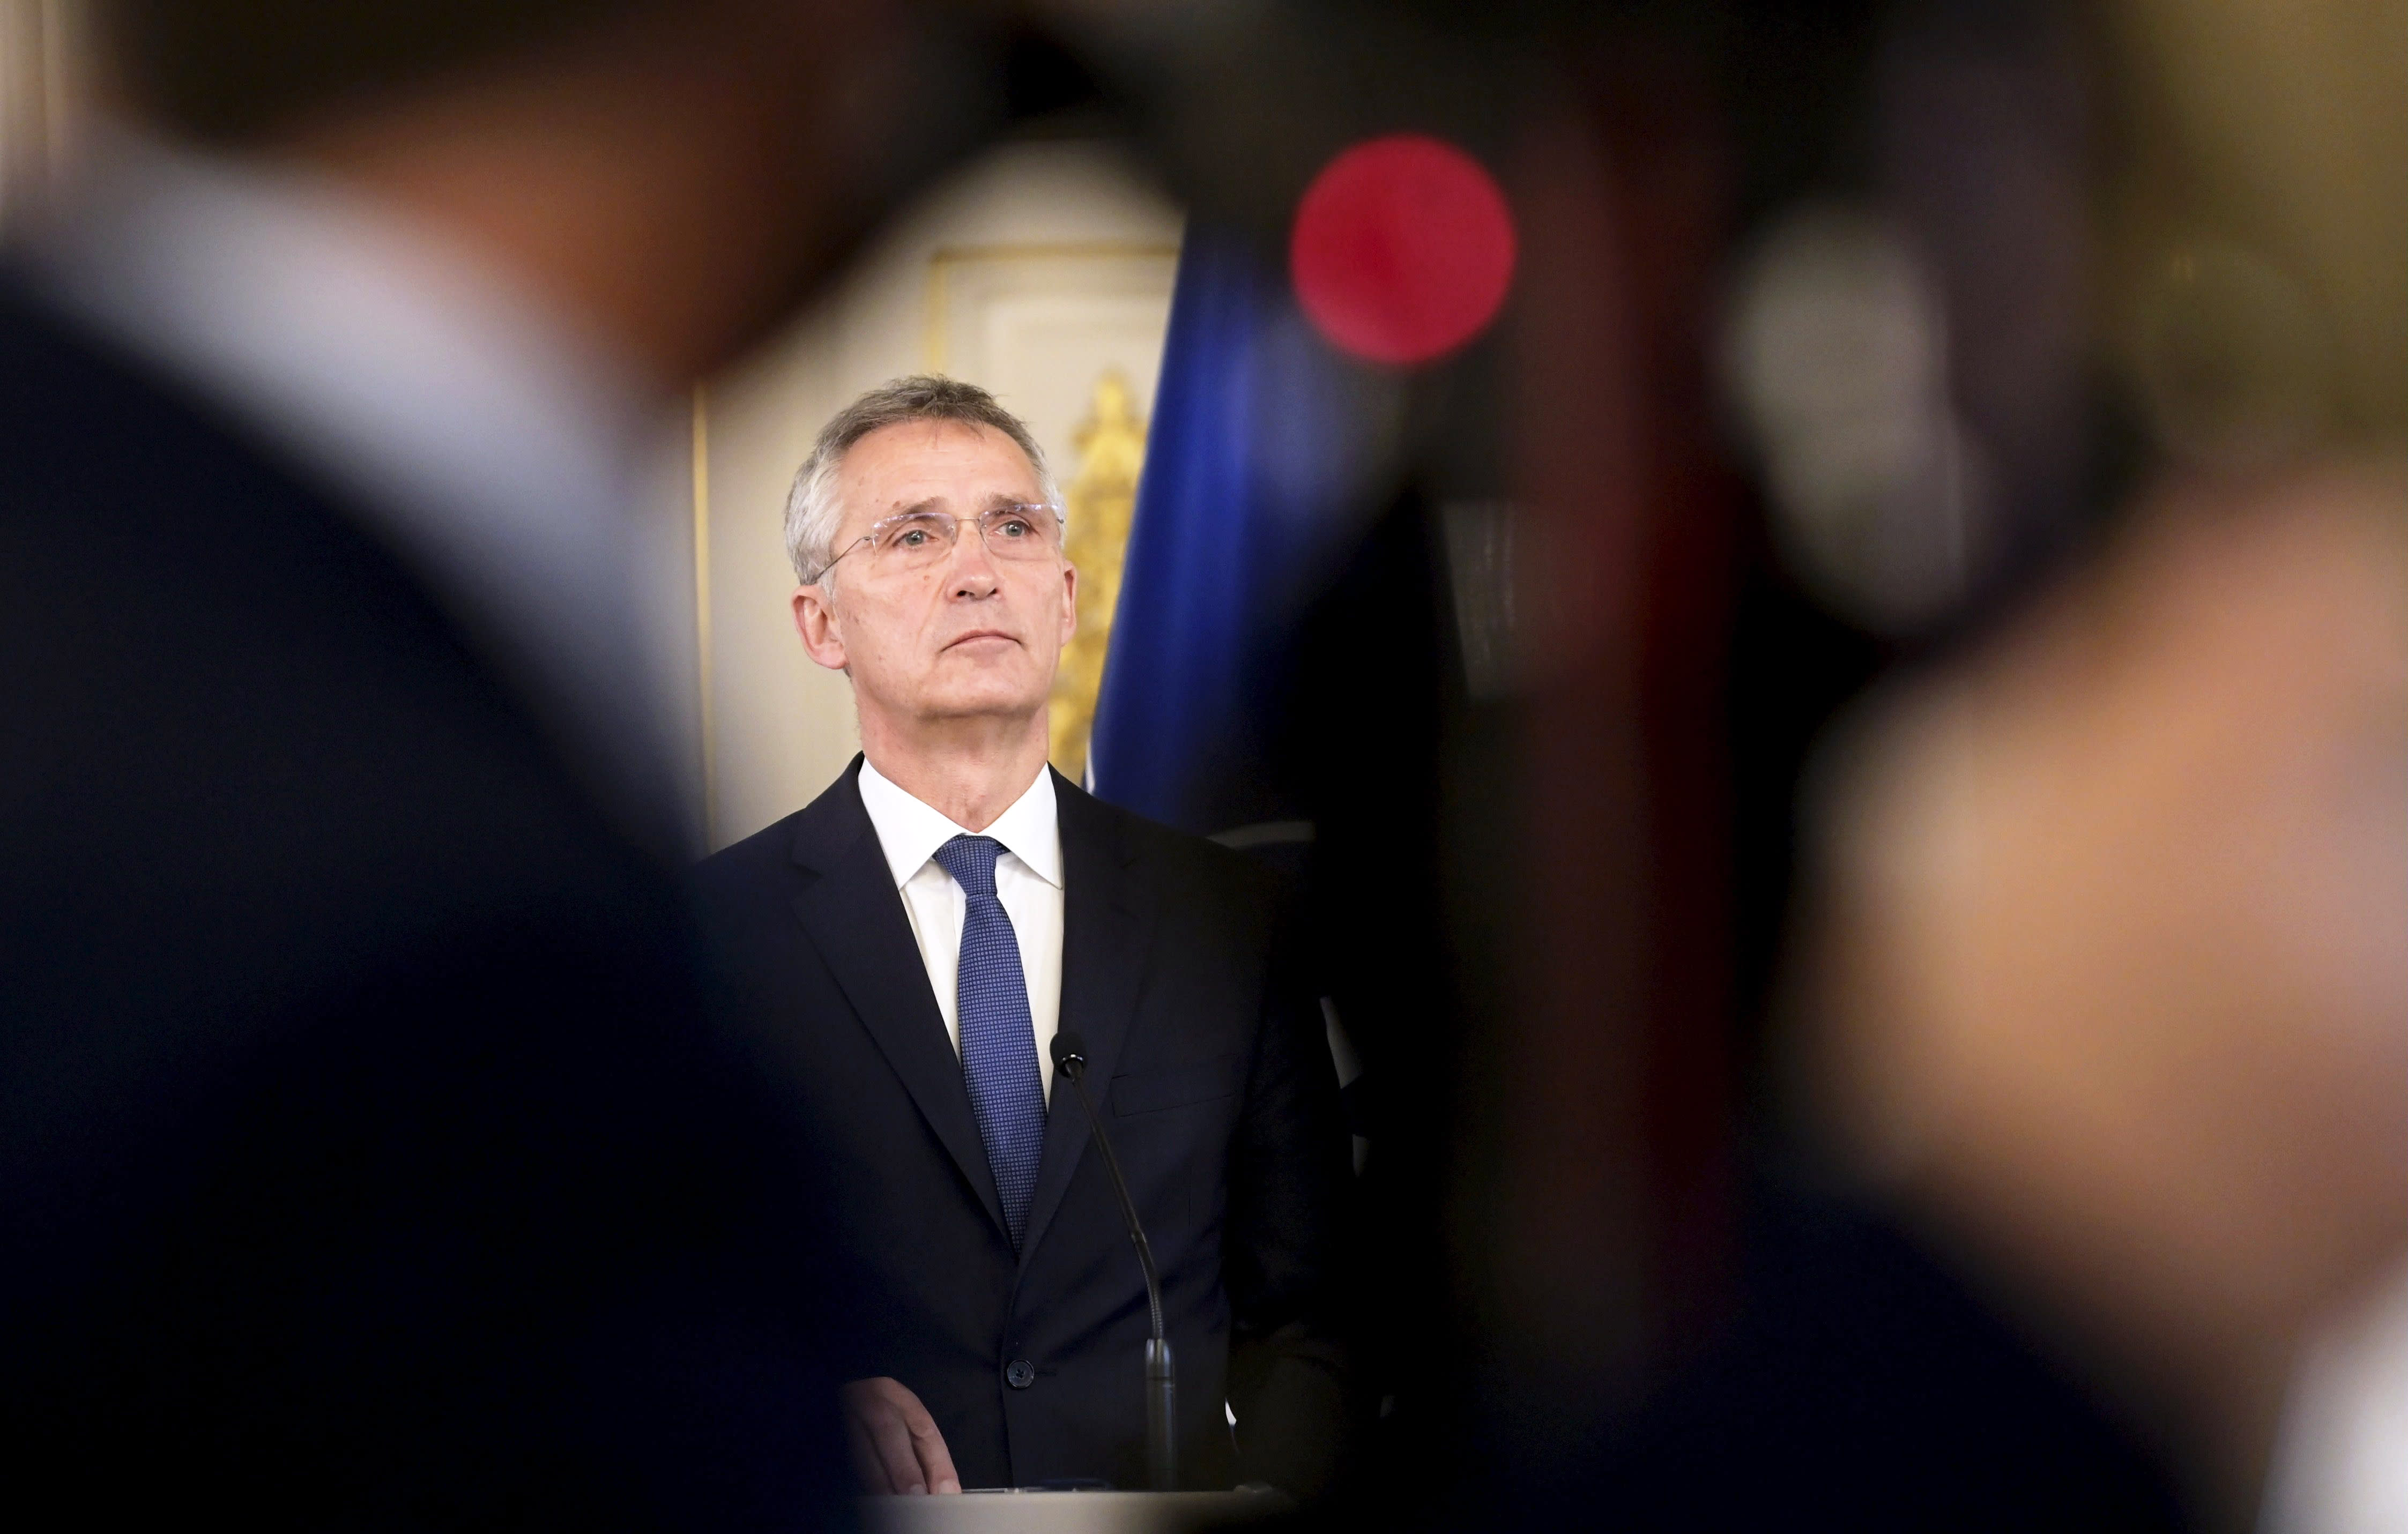 The NATO chief will visit Helsinki, leaving the door open for Finnish membership